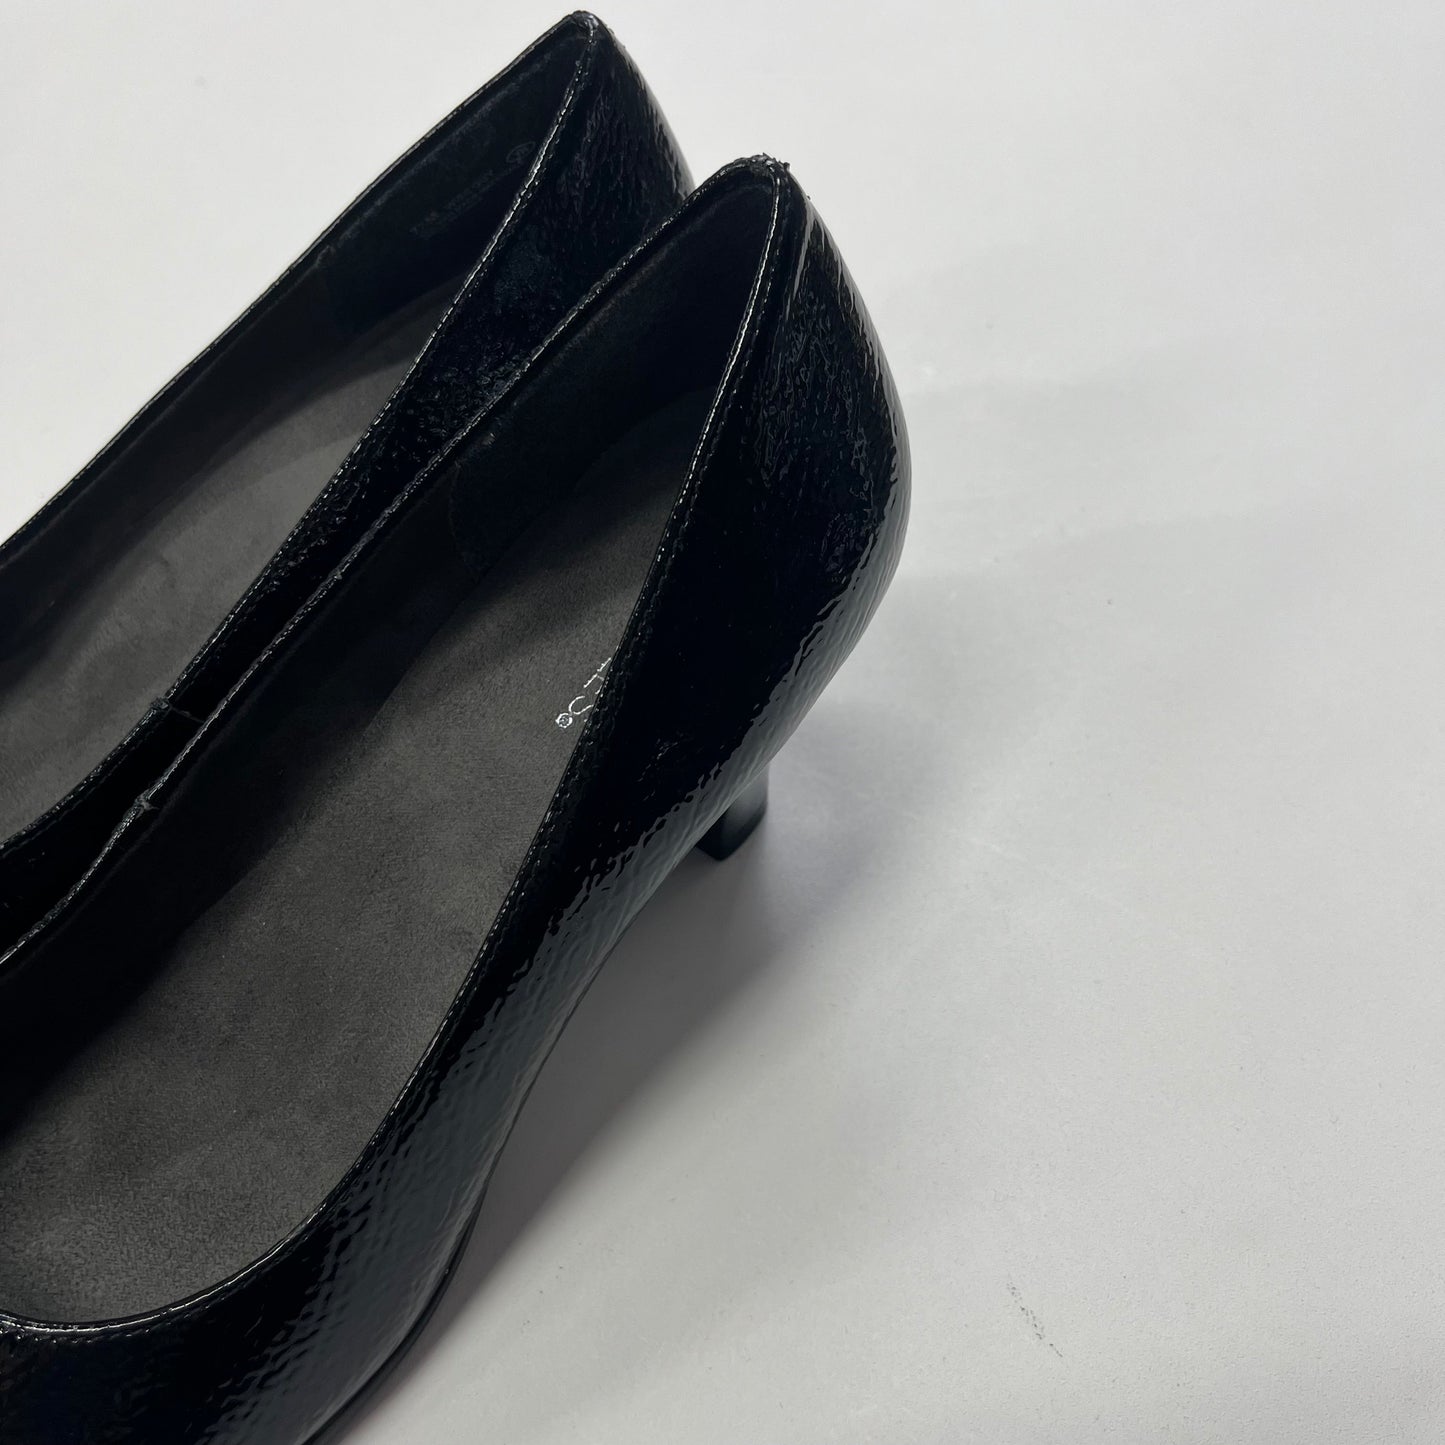 Sandals Flats By Clarks  Size: 7.5